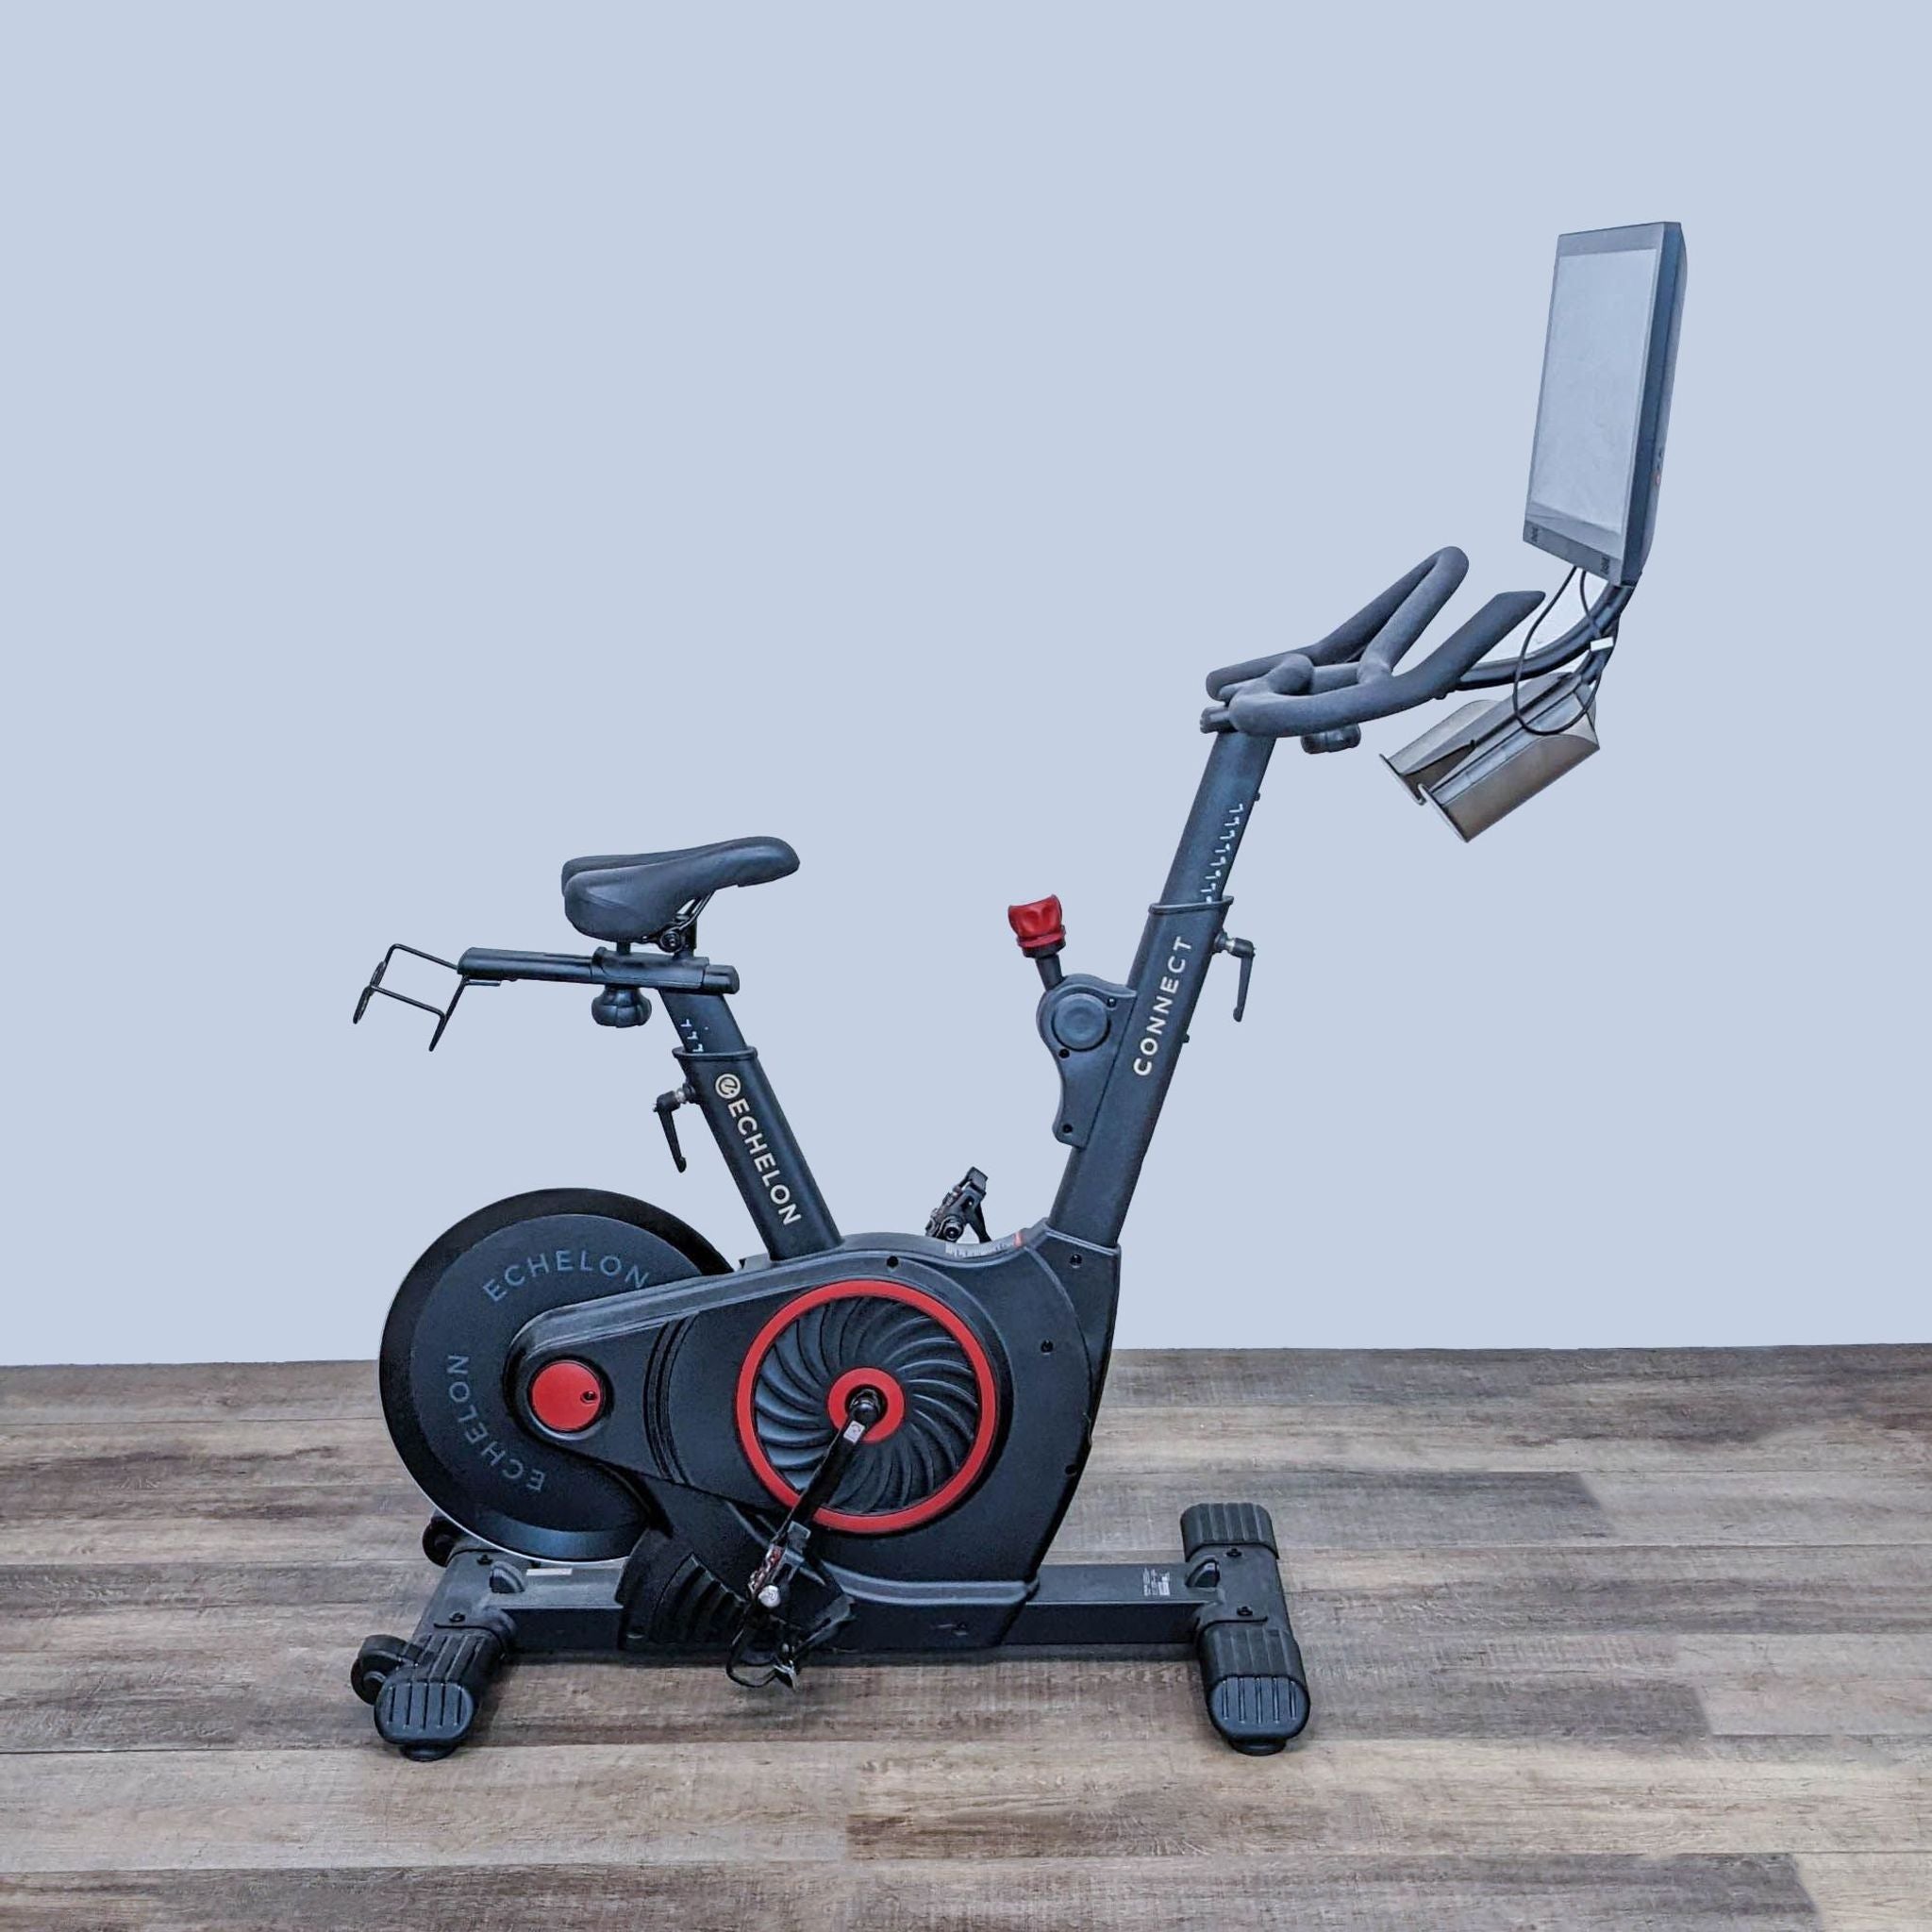 Front-facing view of Echelon's innovative stationary bike with adjustable seating and handlebars, plus a high-definition rotating screen.